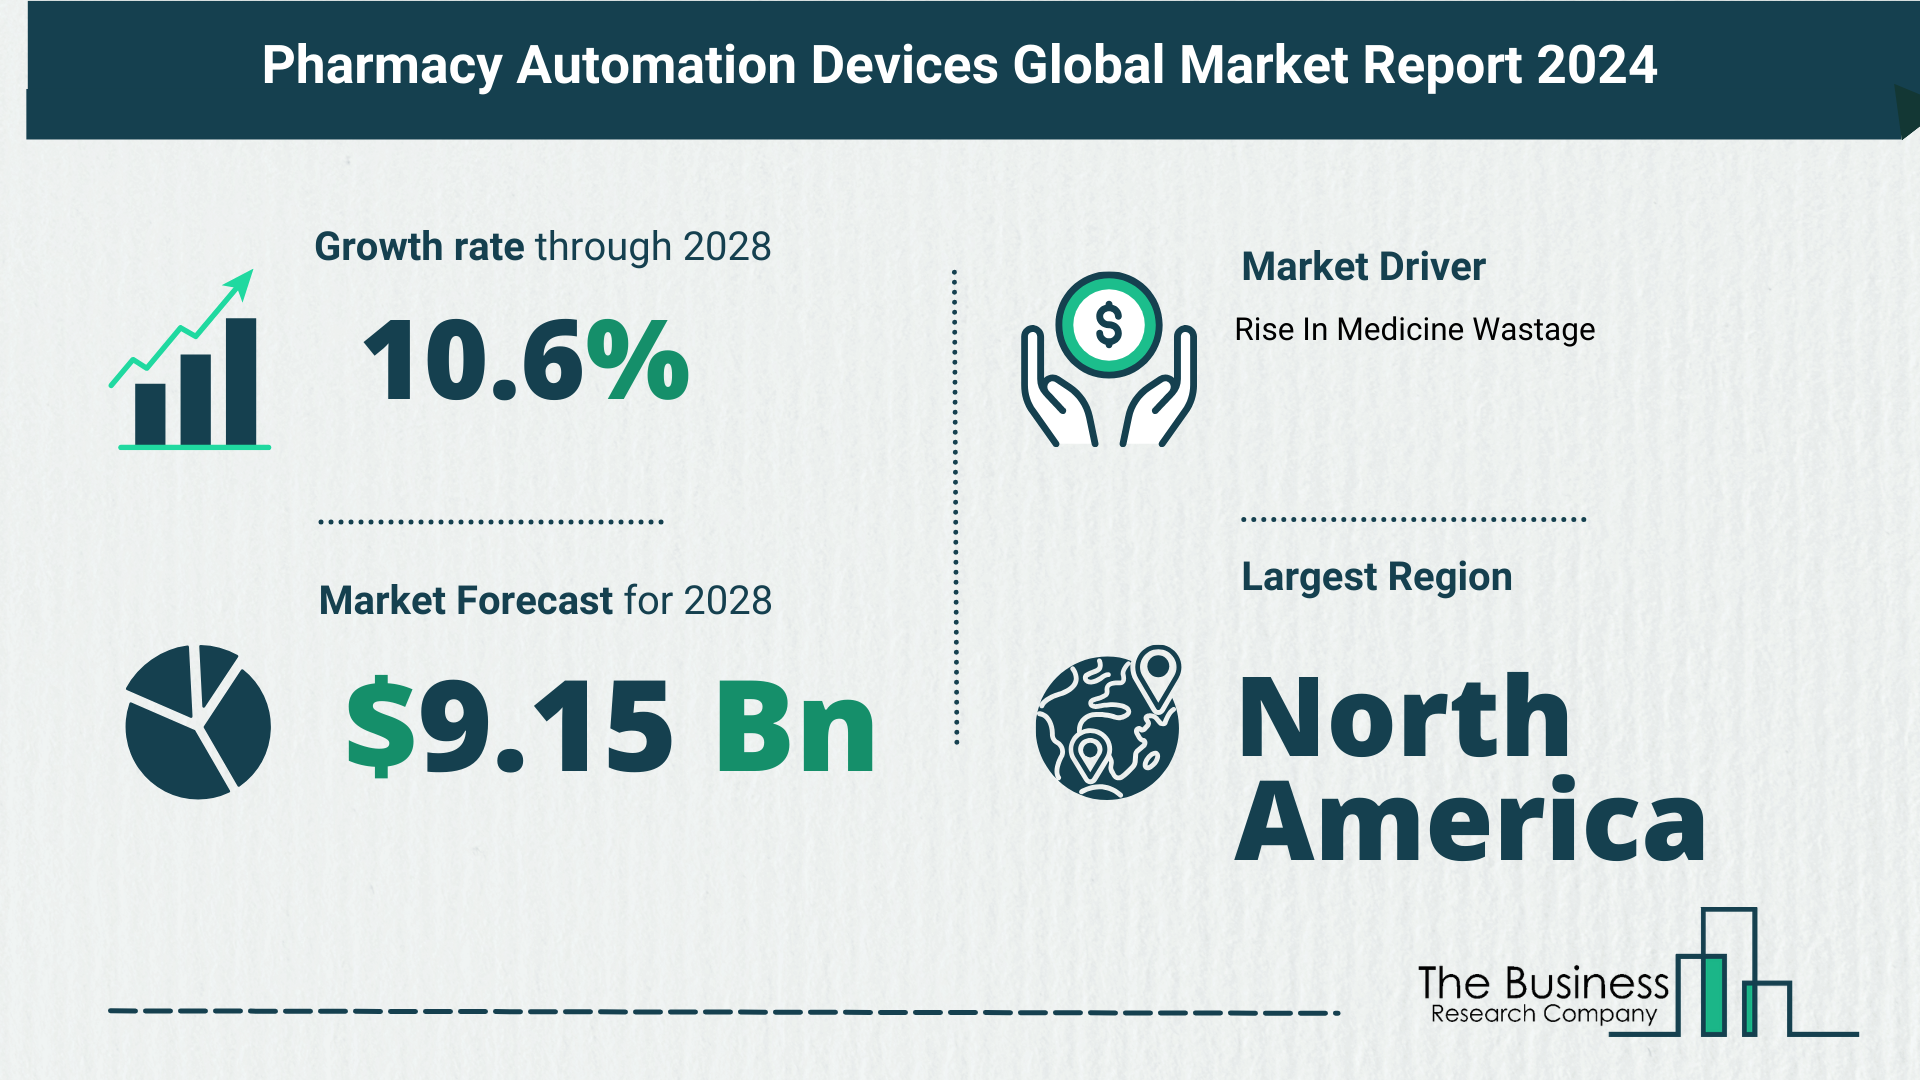 What Is The Forecast Growth Rate For The Pharmacy Automation Devices Market?